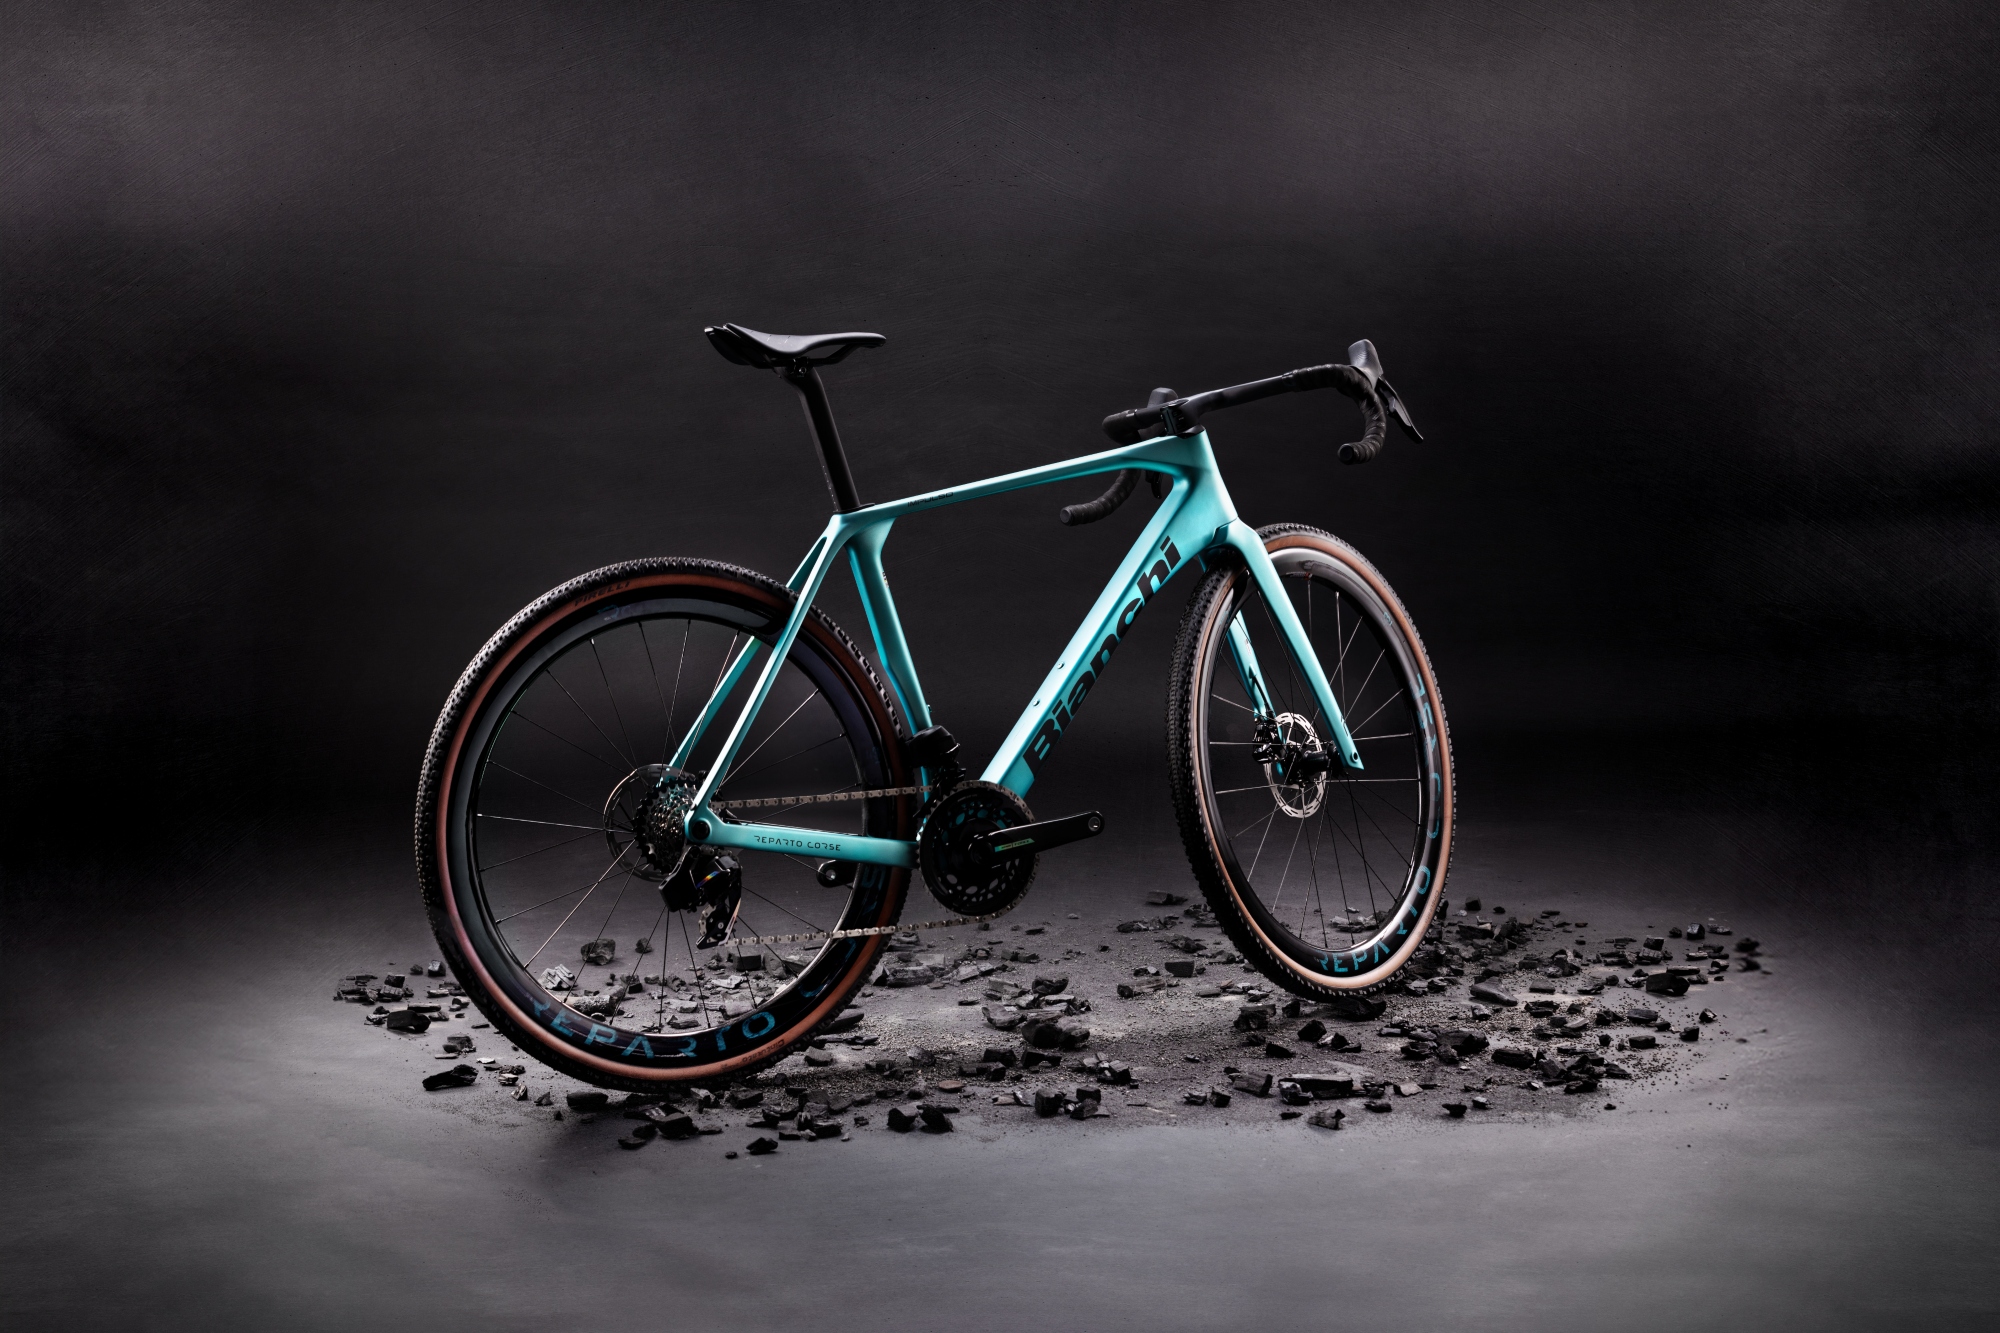 New Bianchi Impulso is a high-performance gravel bike aimed at racing ...